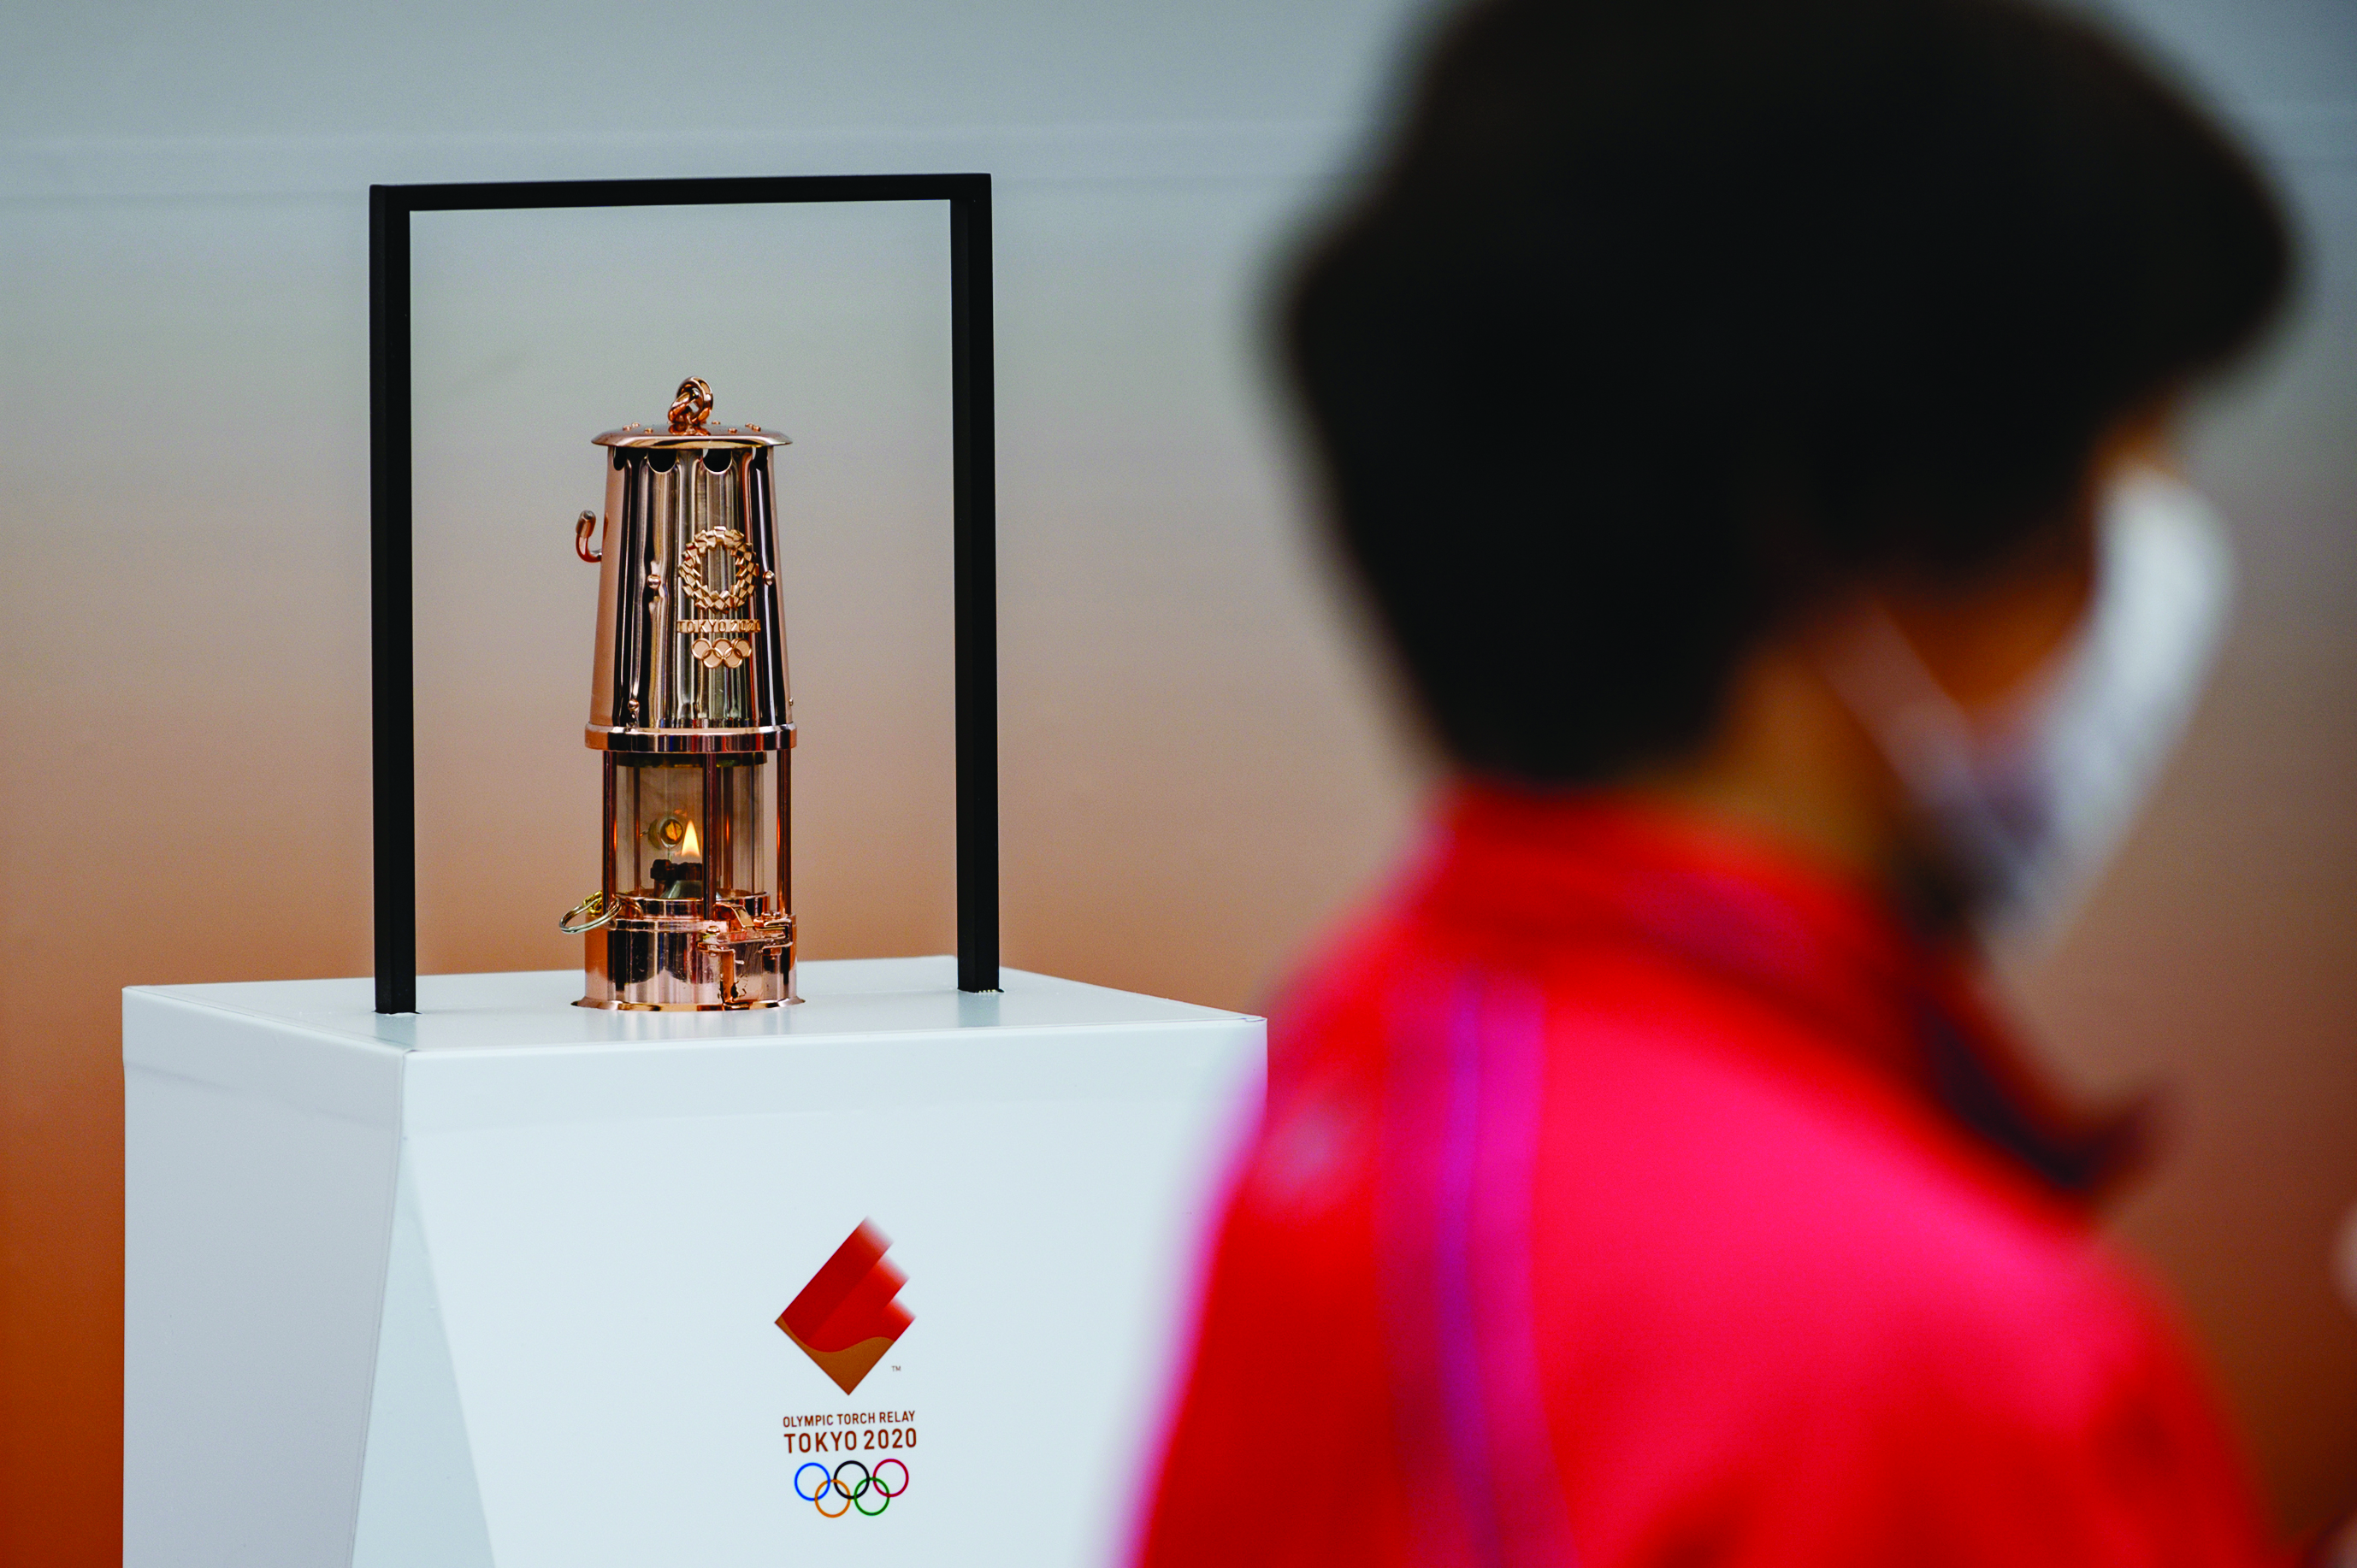 The Tokyo 2020 Olympic flame is displayed outside the railway station in Tono, Iwate prefecture on March 22, 2020. - The flame arrived in Japan to a scaled-down welcoming ceremony on March 20 as doubts grew over whether the 2020 Tokyo Olympics will go ahead on schedule as the deadly COVID-19 coronavirus causes chaos around the world. (Photo by Philip FONG / AFP)